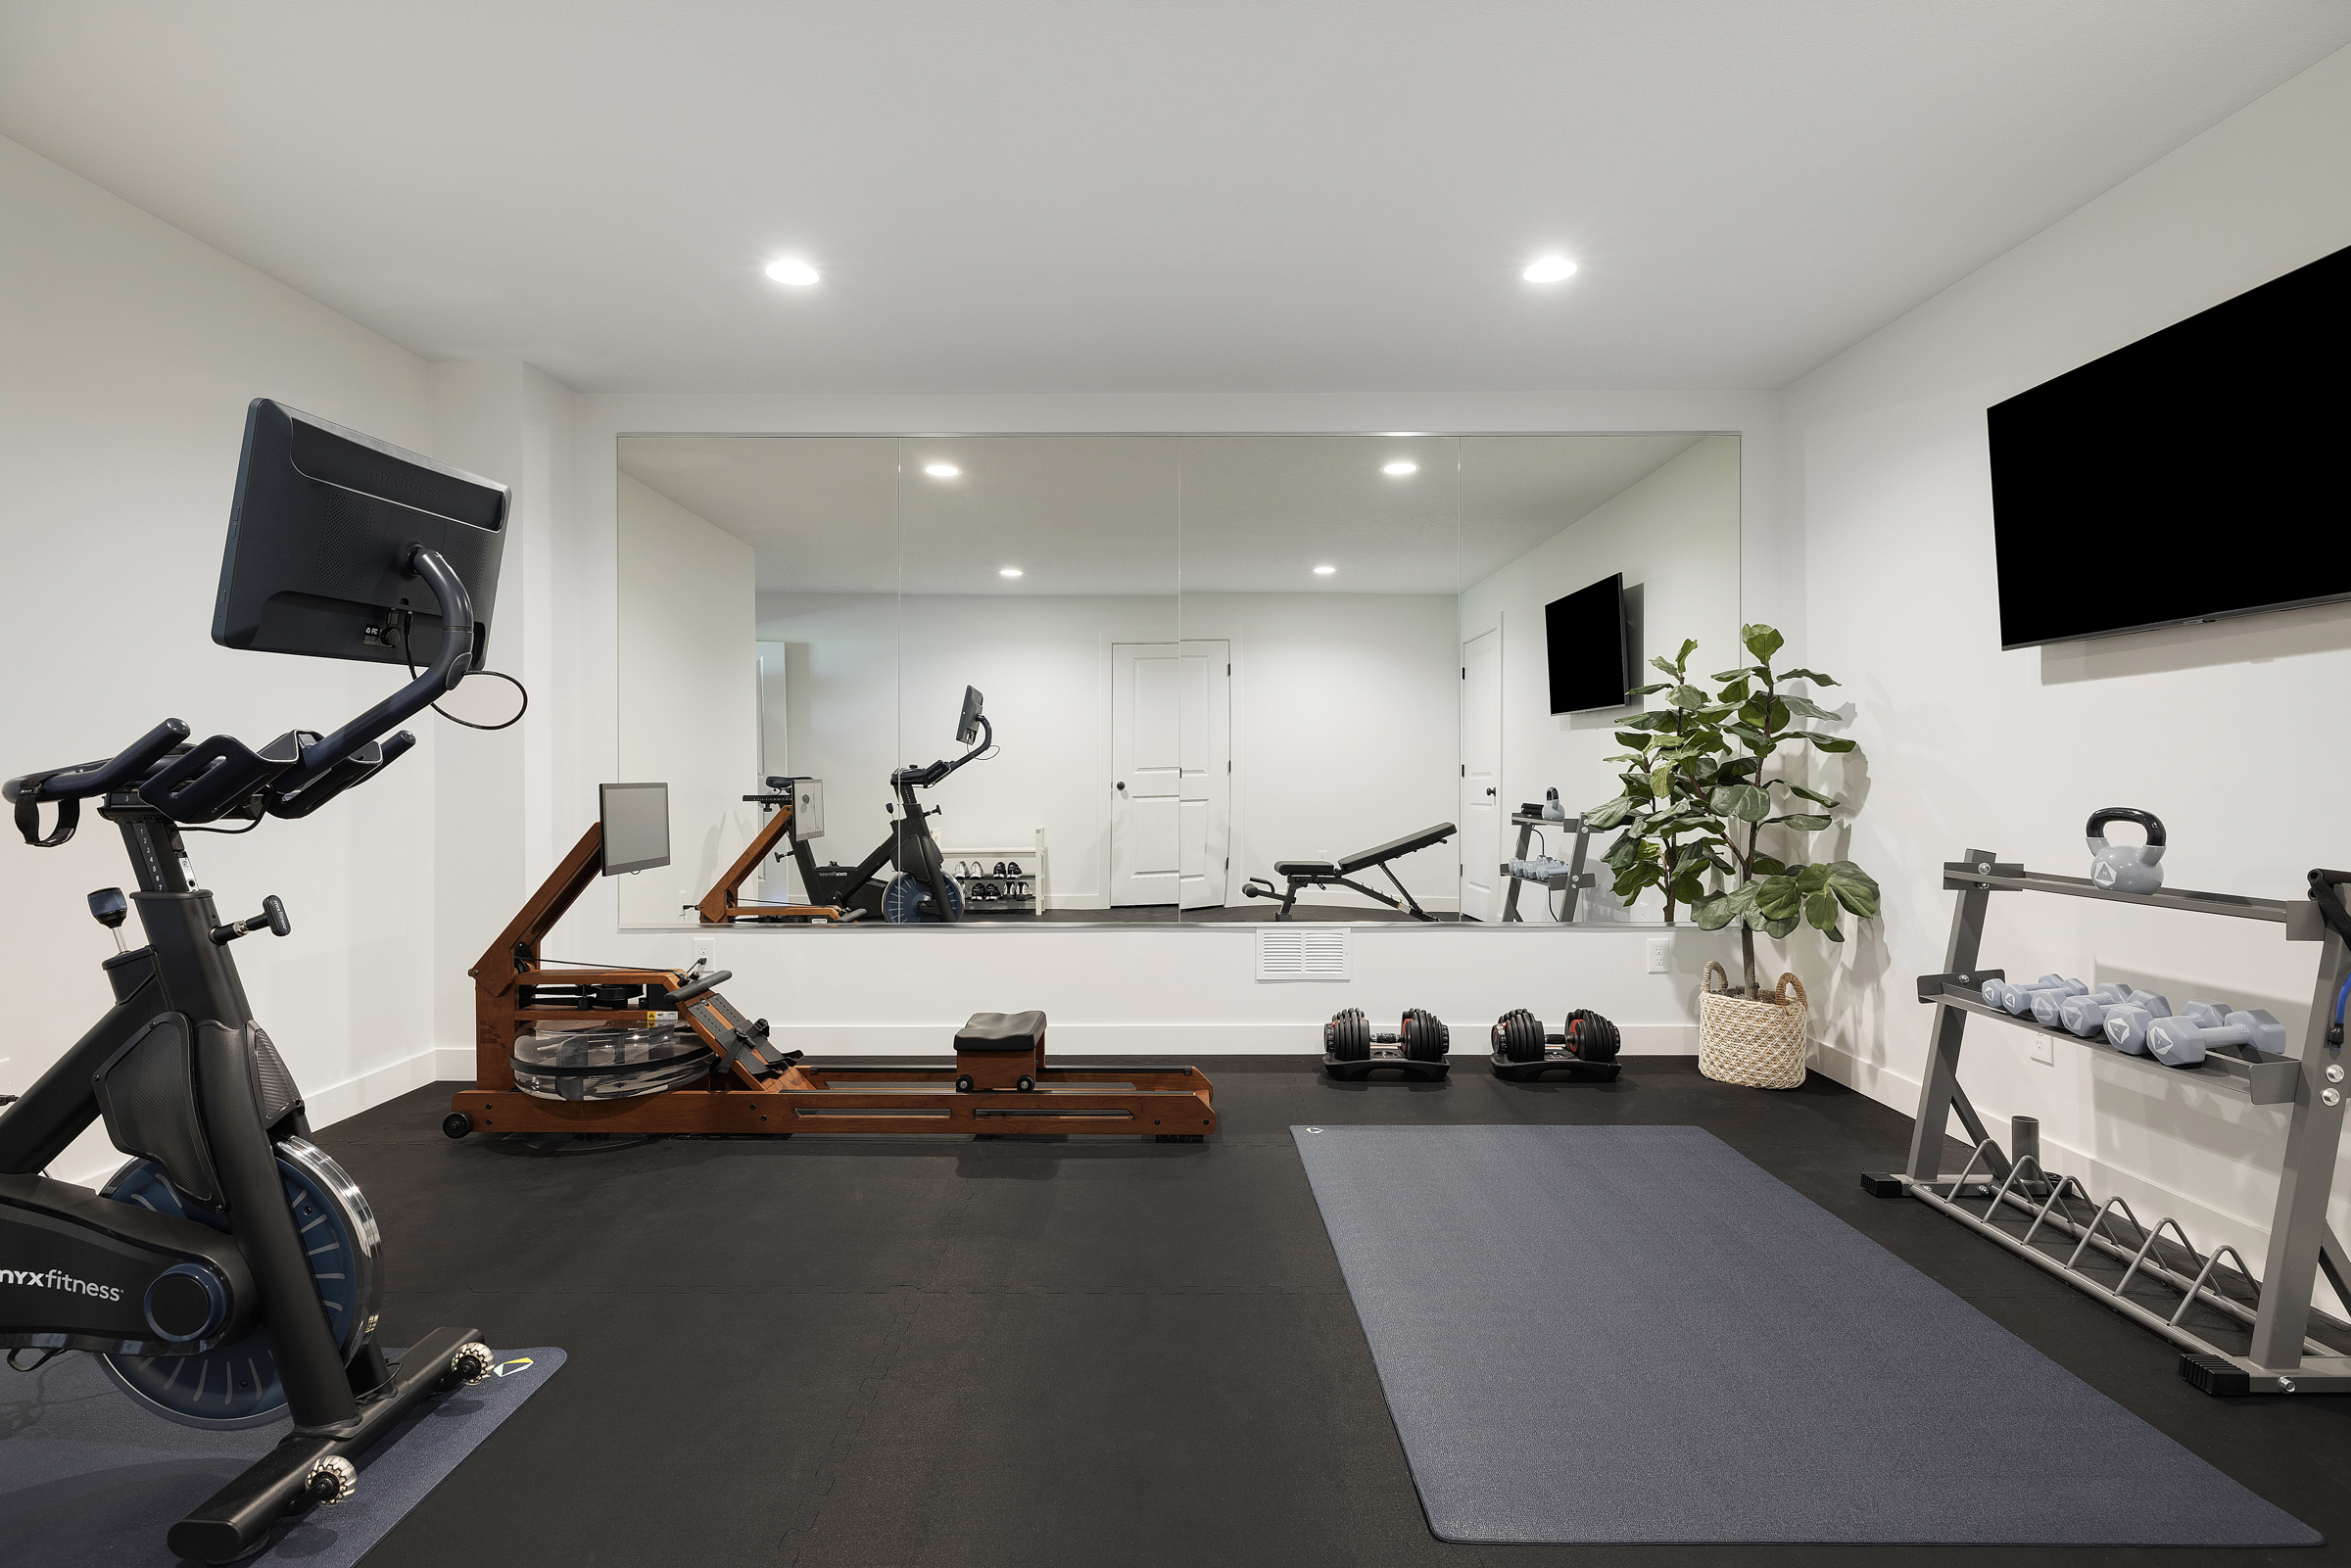 The Styled Press Gym Reveal | Before and After 62